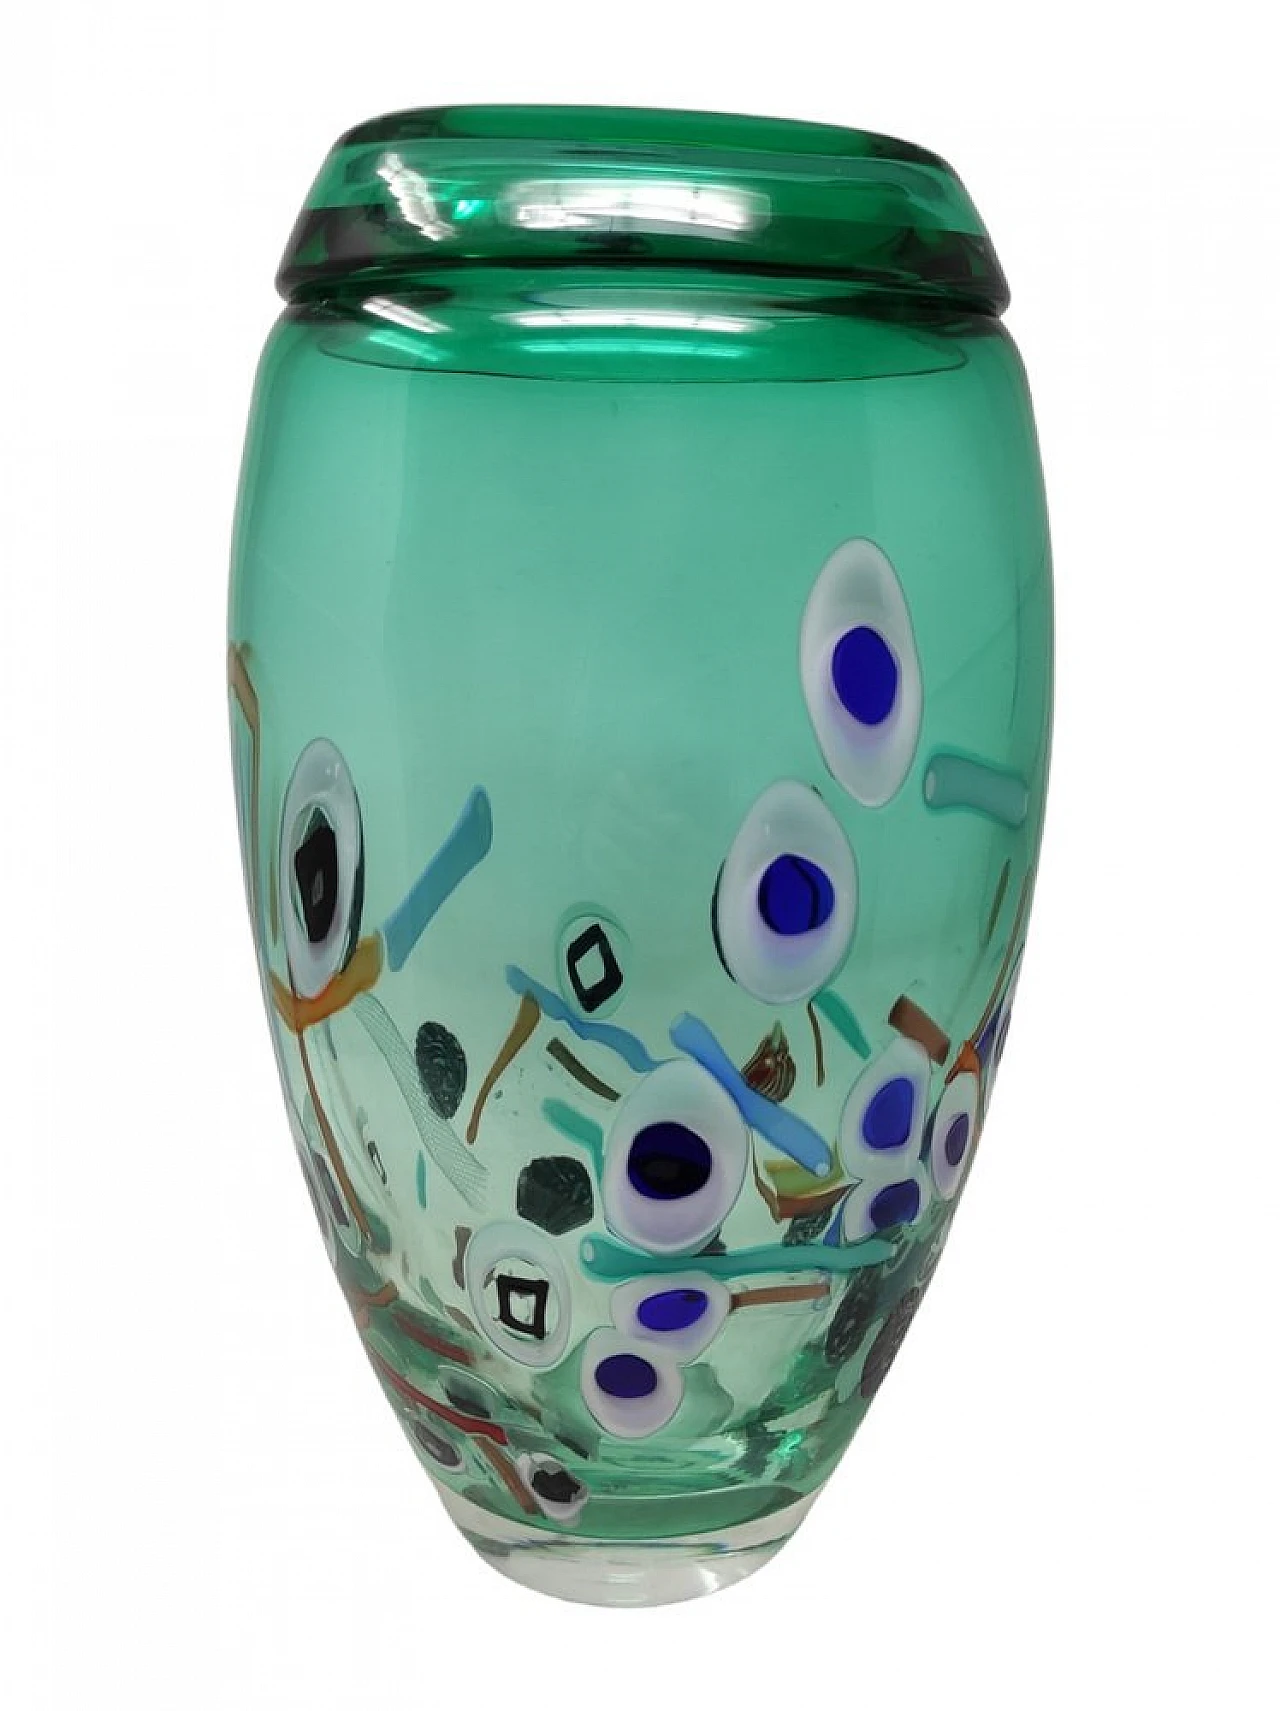 Teal Murano glass vase by M. Costantini, 1998 1